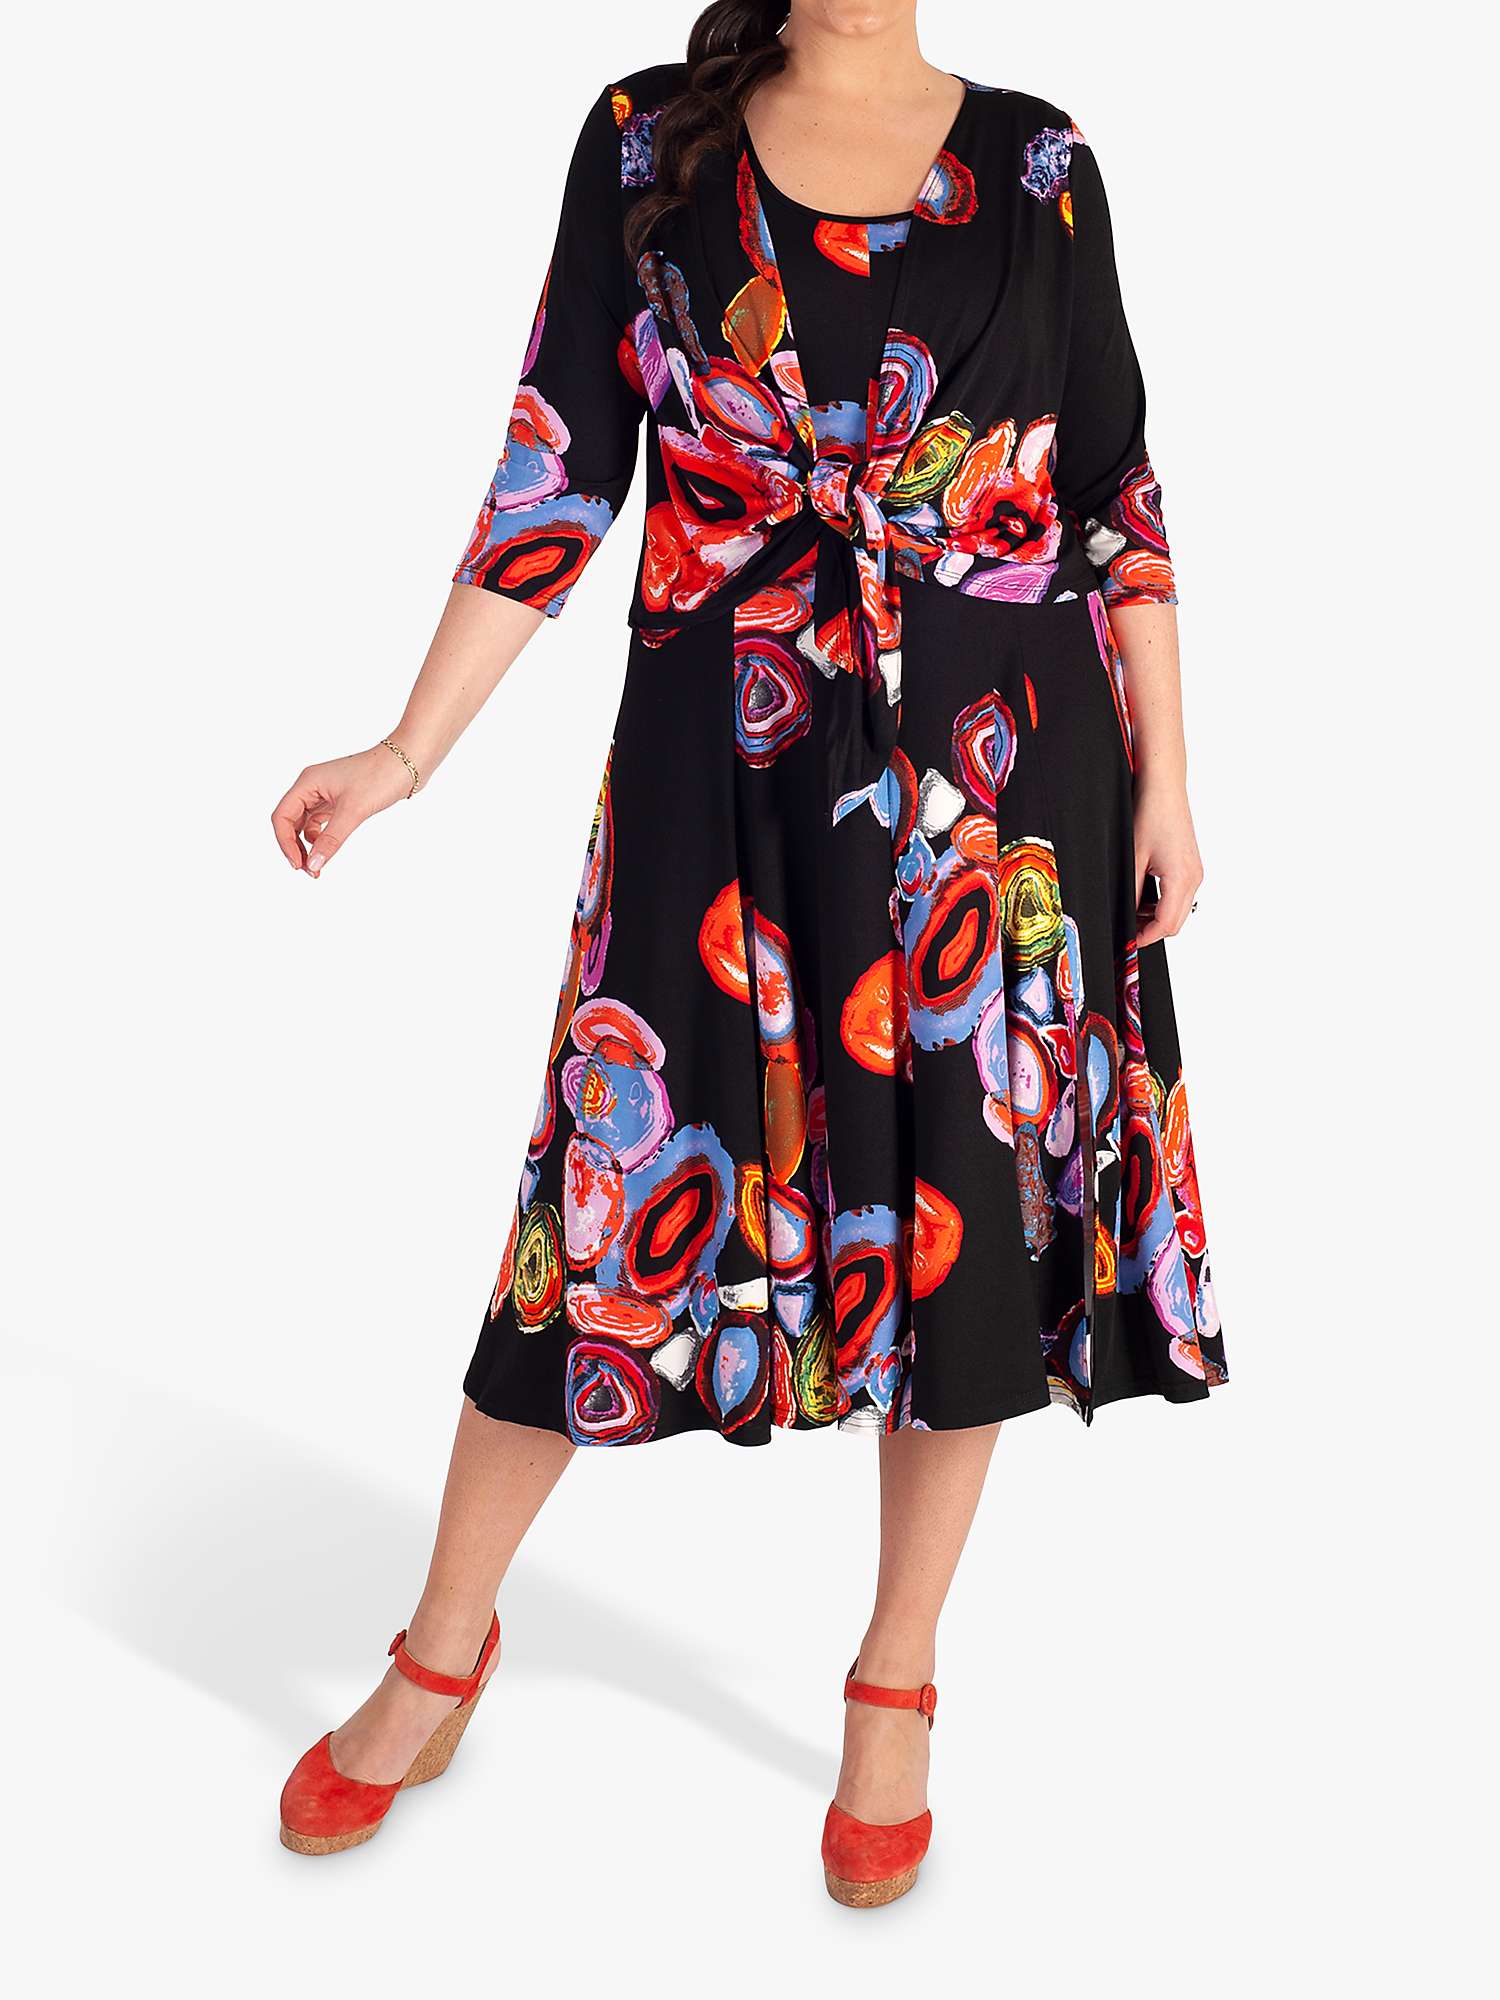 Buy chesca Abstract Print Bolero Jacket Online at johnlewis.com